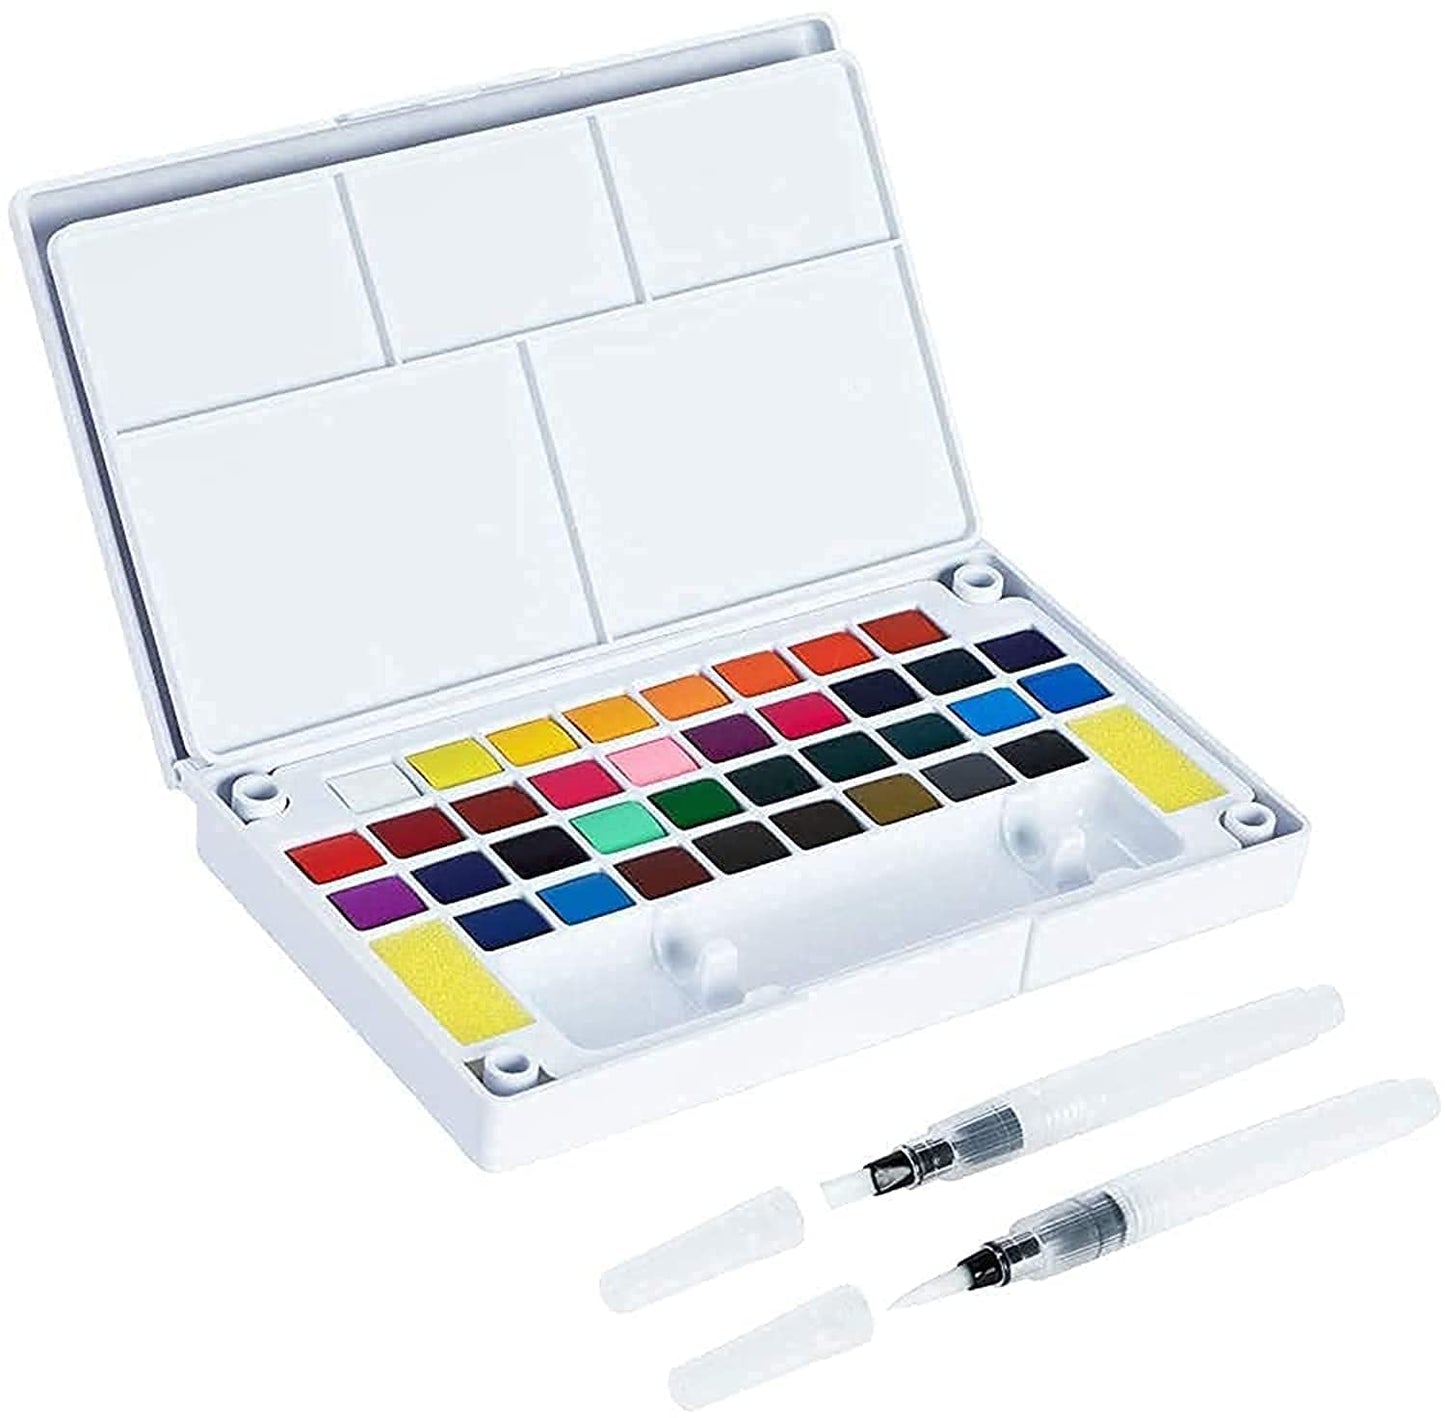 Nyganmelloz 36Color Solid Watercolor Paints Set Portable Travel Watercolor Kit with 2 Blending Brush Pens Drawing Pigment Water Color Painting Set Art Supplies For Students, Kids, Beginners, Artists